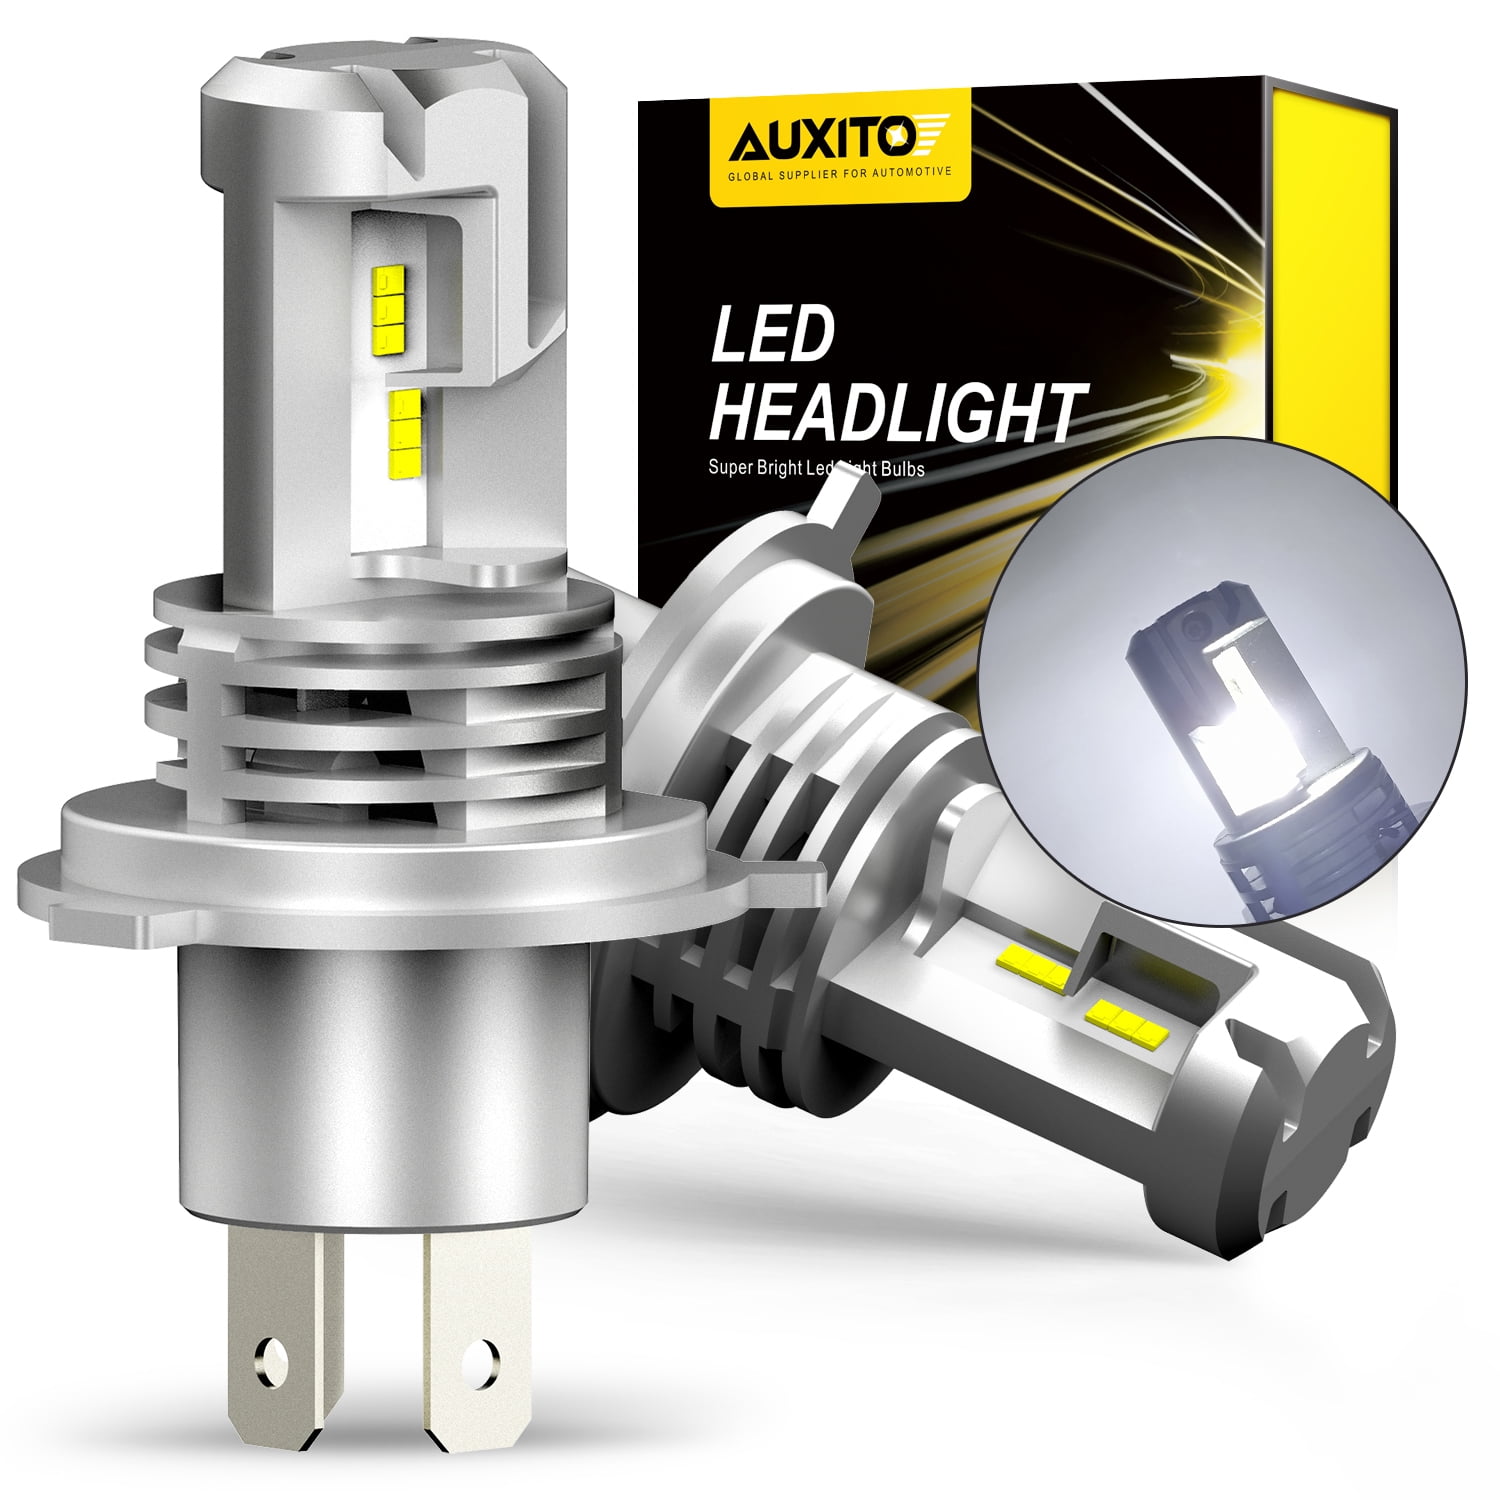 Usually accept Generator AUXITO H4 9003 HB2 LED Headlight Bulbs, 12000LM Per Set 6500K Xenon White  for High and Low Beam Hi/Lo, Pack of 2 - Walmart.com